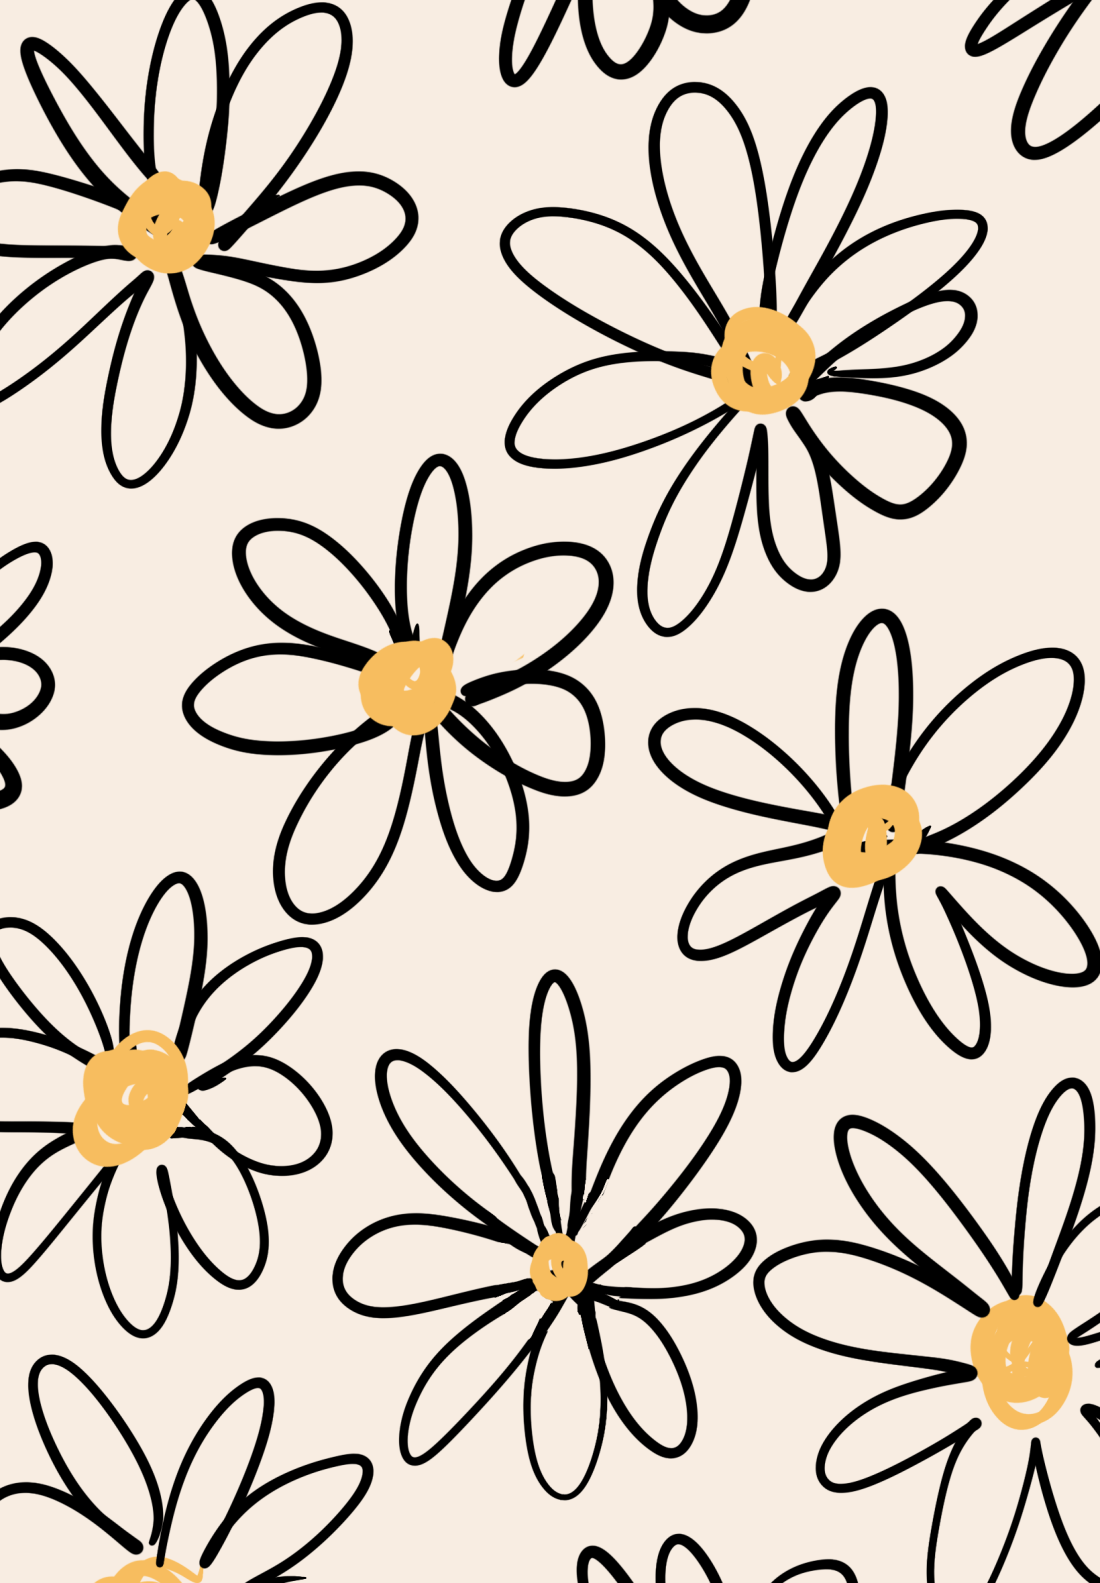 A pattern of daisies on beige background - Preppy